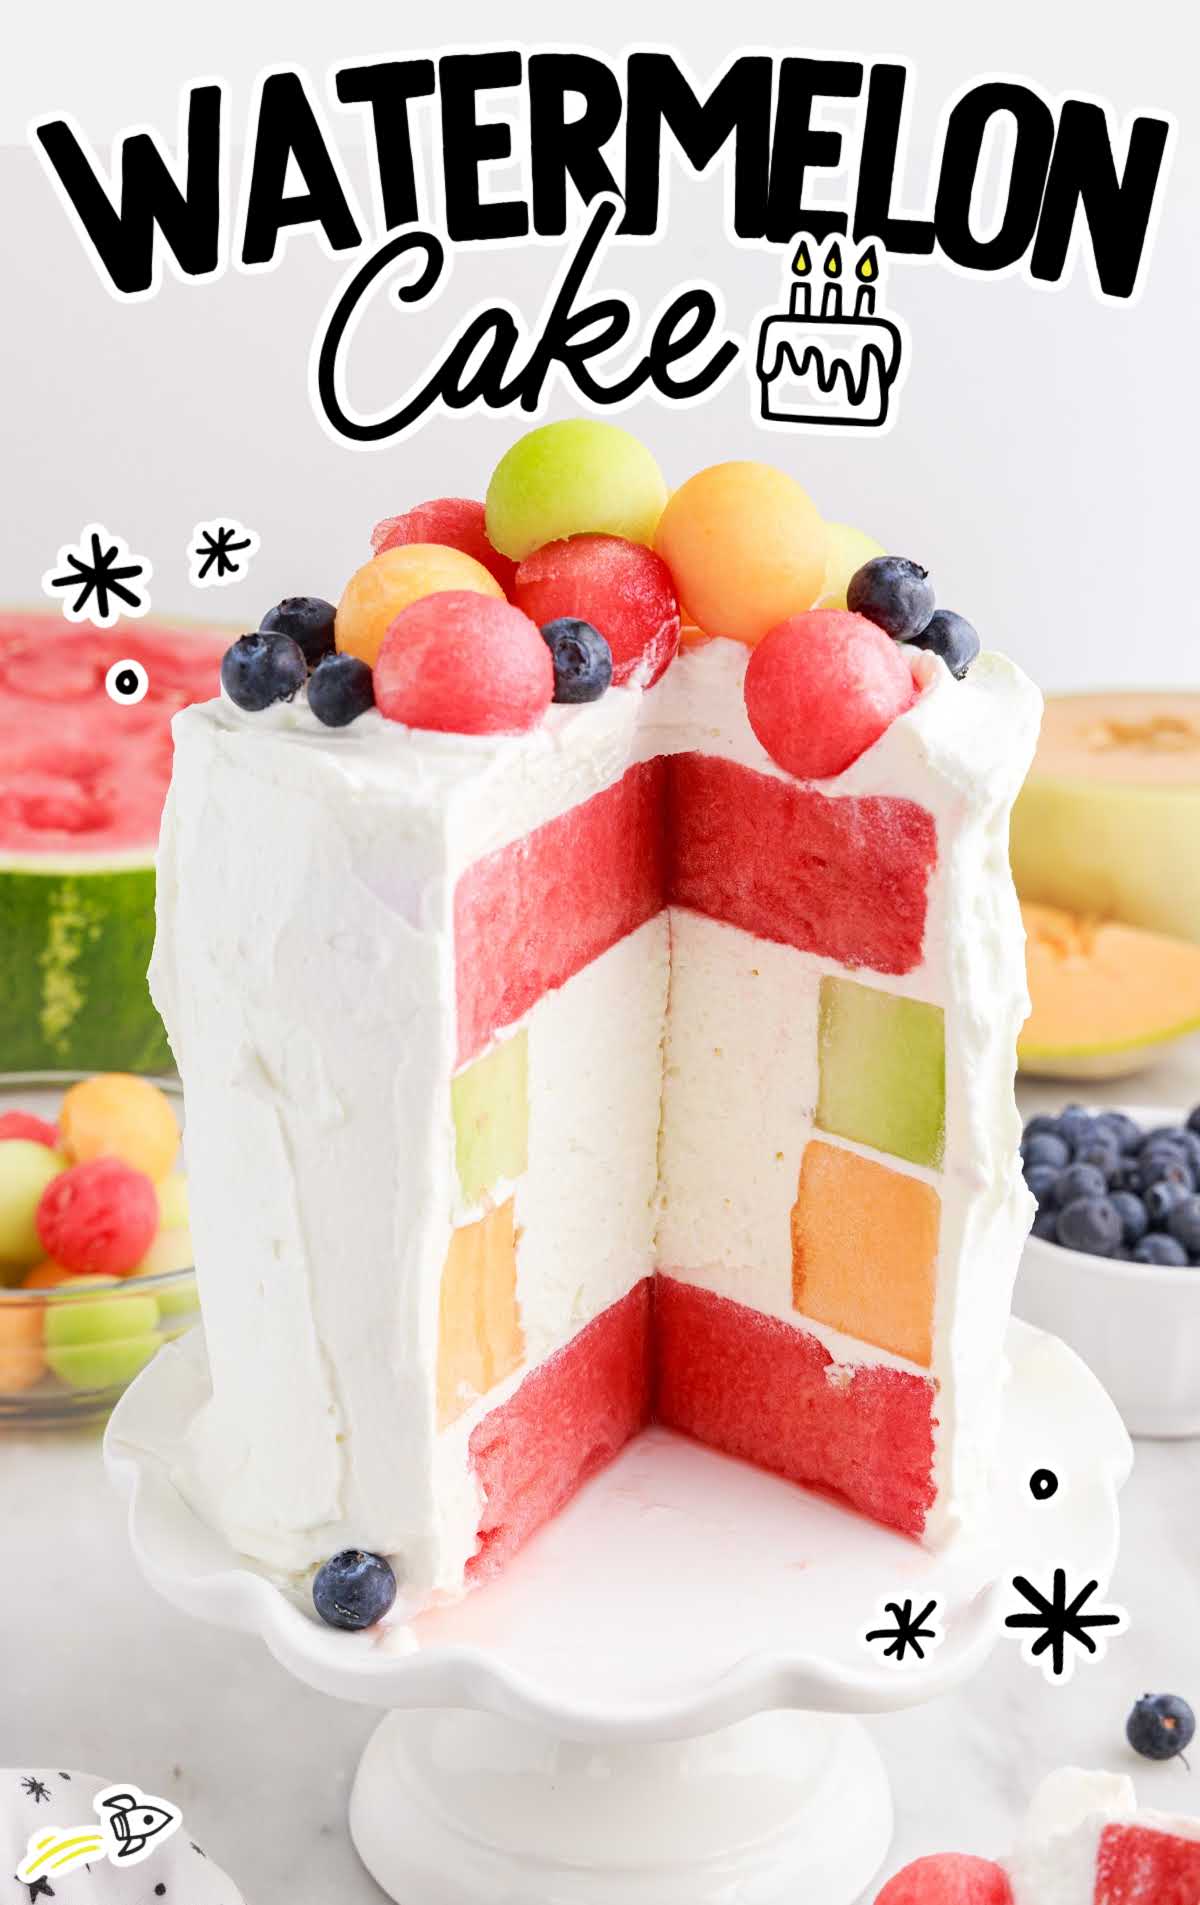 Watermelon Cake on a cake stand with a slice taken out topped with melon balls and blueberries